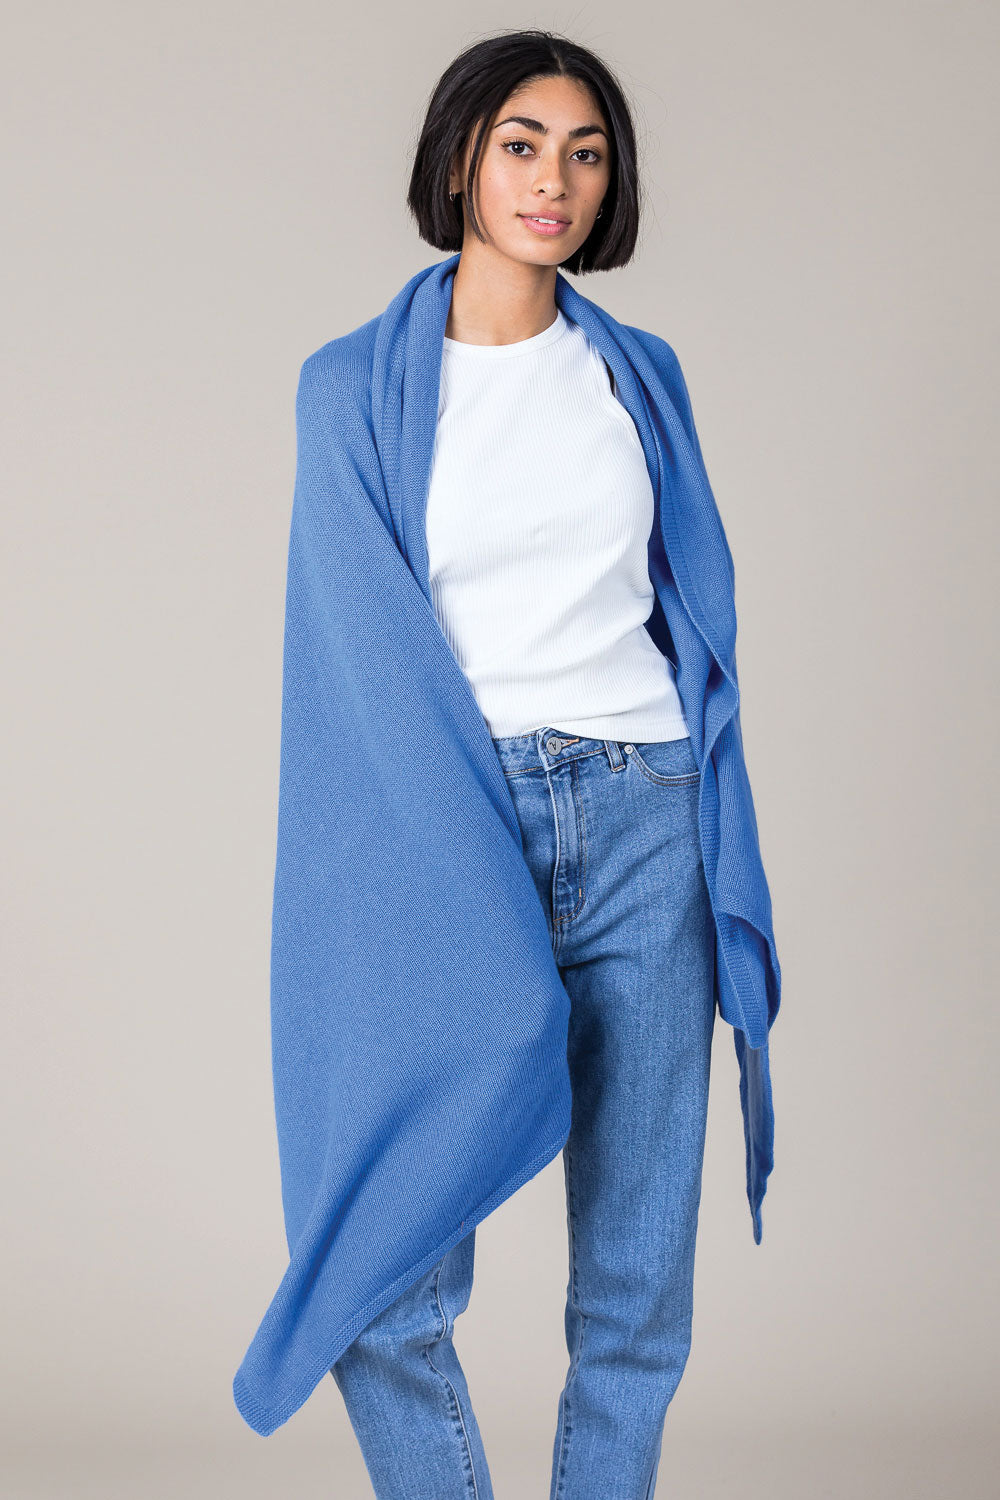 Cashmere Travel Wrap in Isfahan Blue